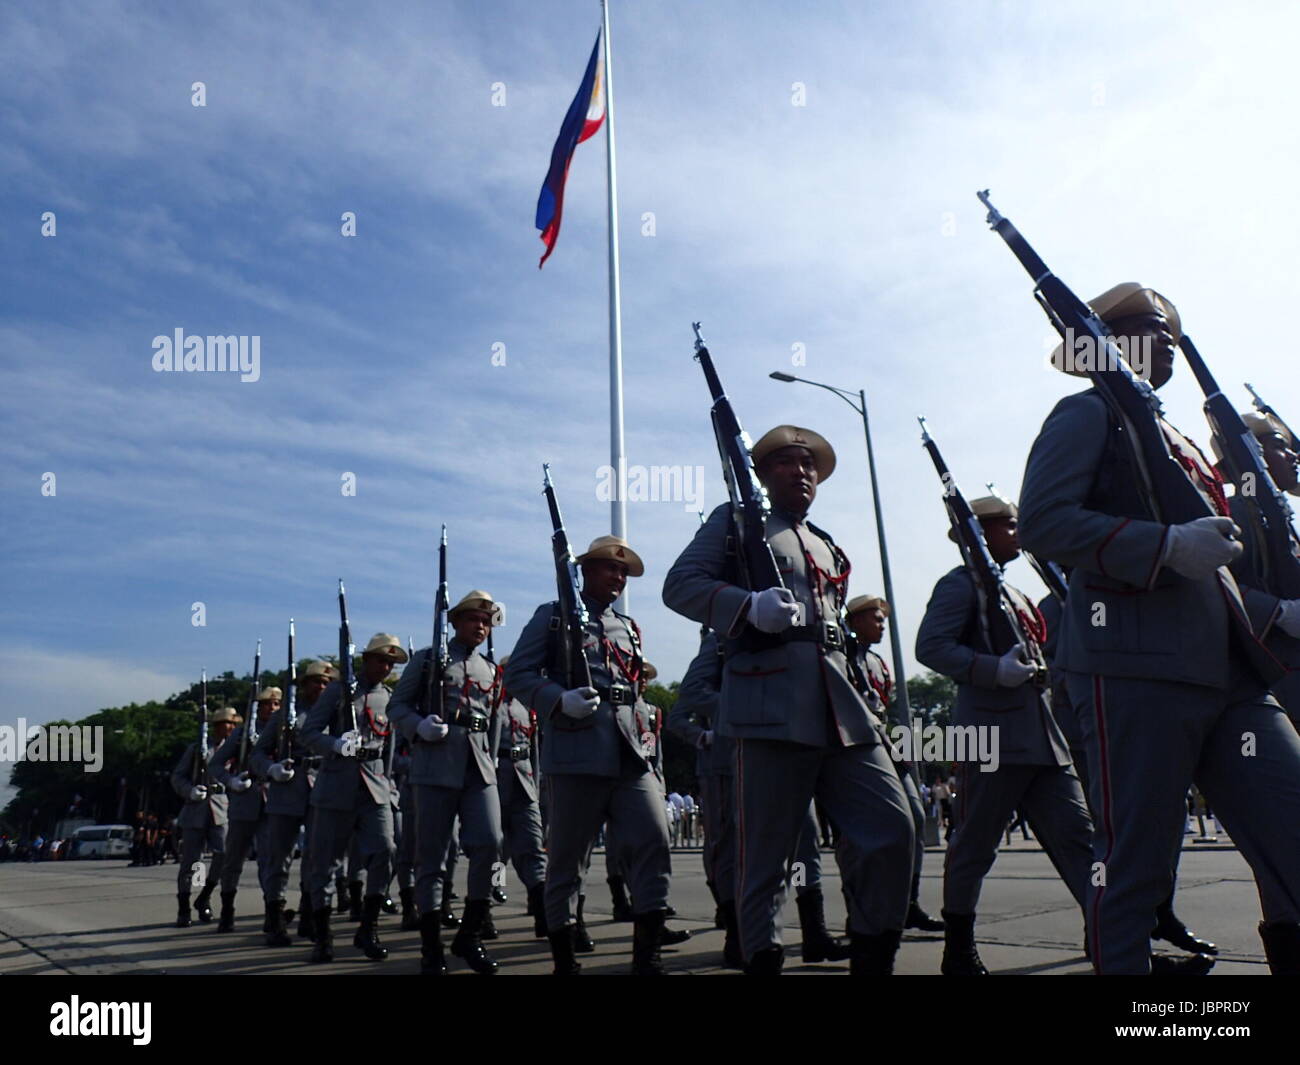 Manila, Philippines. 12th June, 2017. 119th Independence Day Celebration in Manila Philippines which was attended by Vice President Leni Robredo, PNP chief Ronald 'Bato' dela Rosa, PDIR Oscar Albayade, Mayor Joseph Estrada, among others. Credit: Sherbien Dacalanio/Pacific Press/Alamy Live News Stock Photo